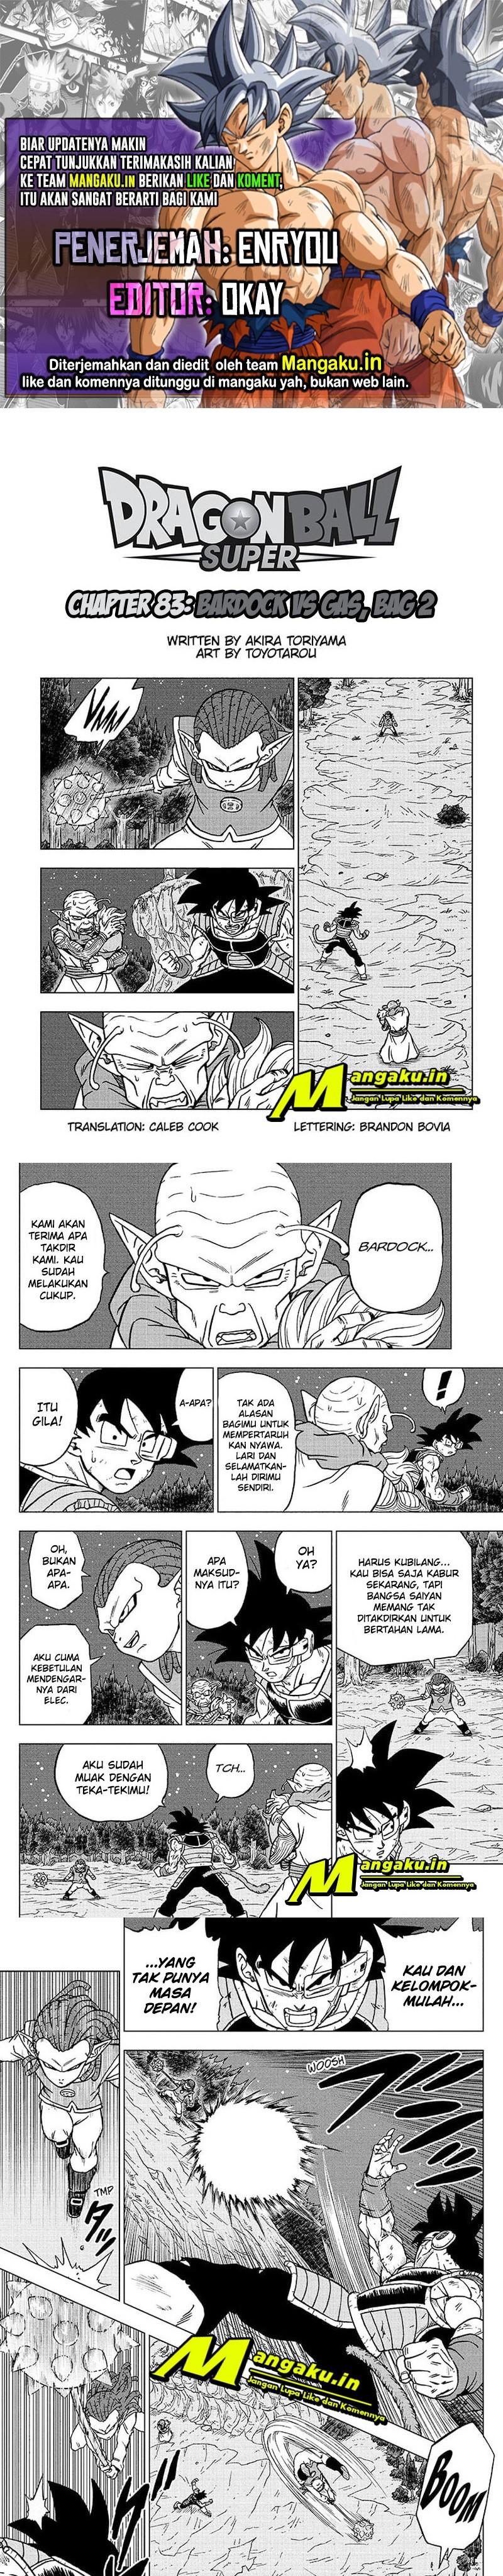 Dragon Ball Super: Chapter 83.2 - Page 1